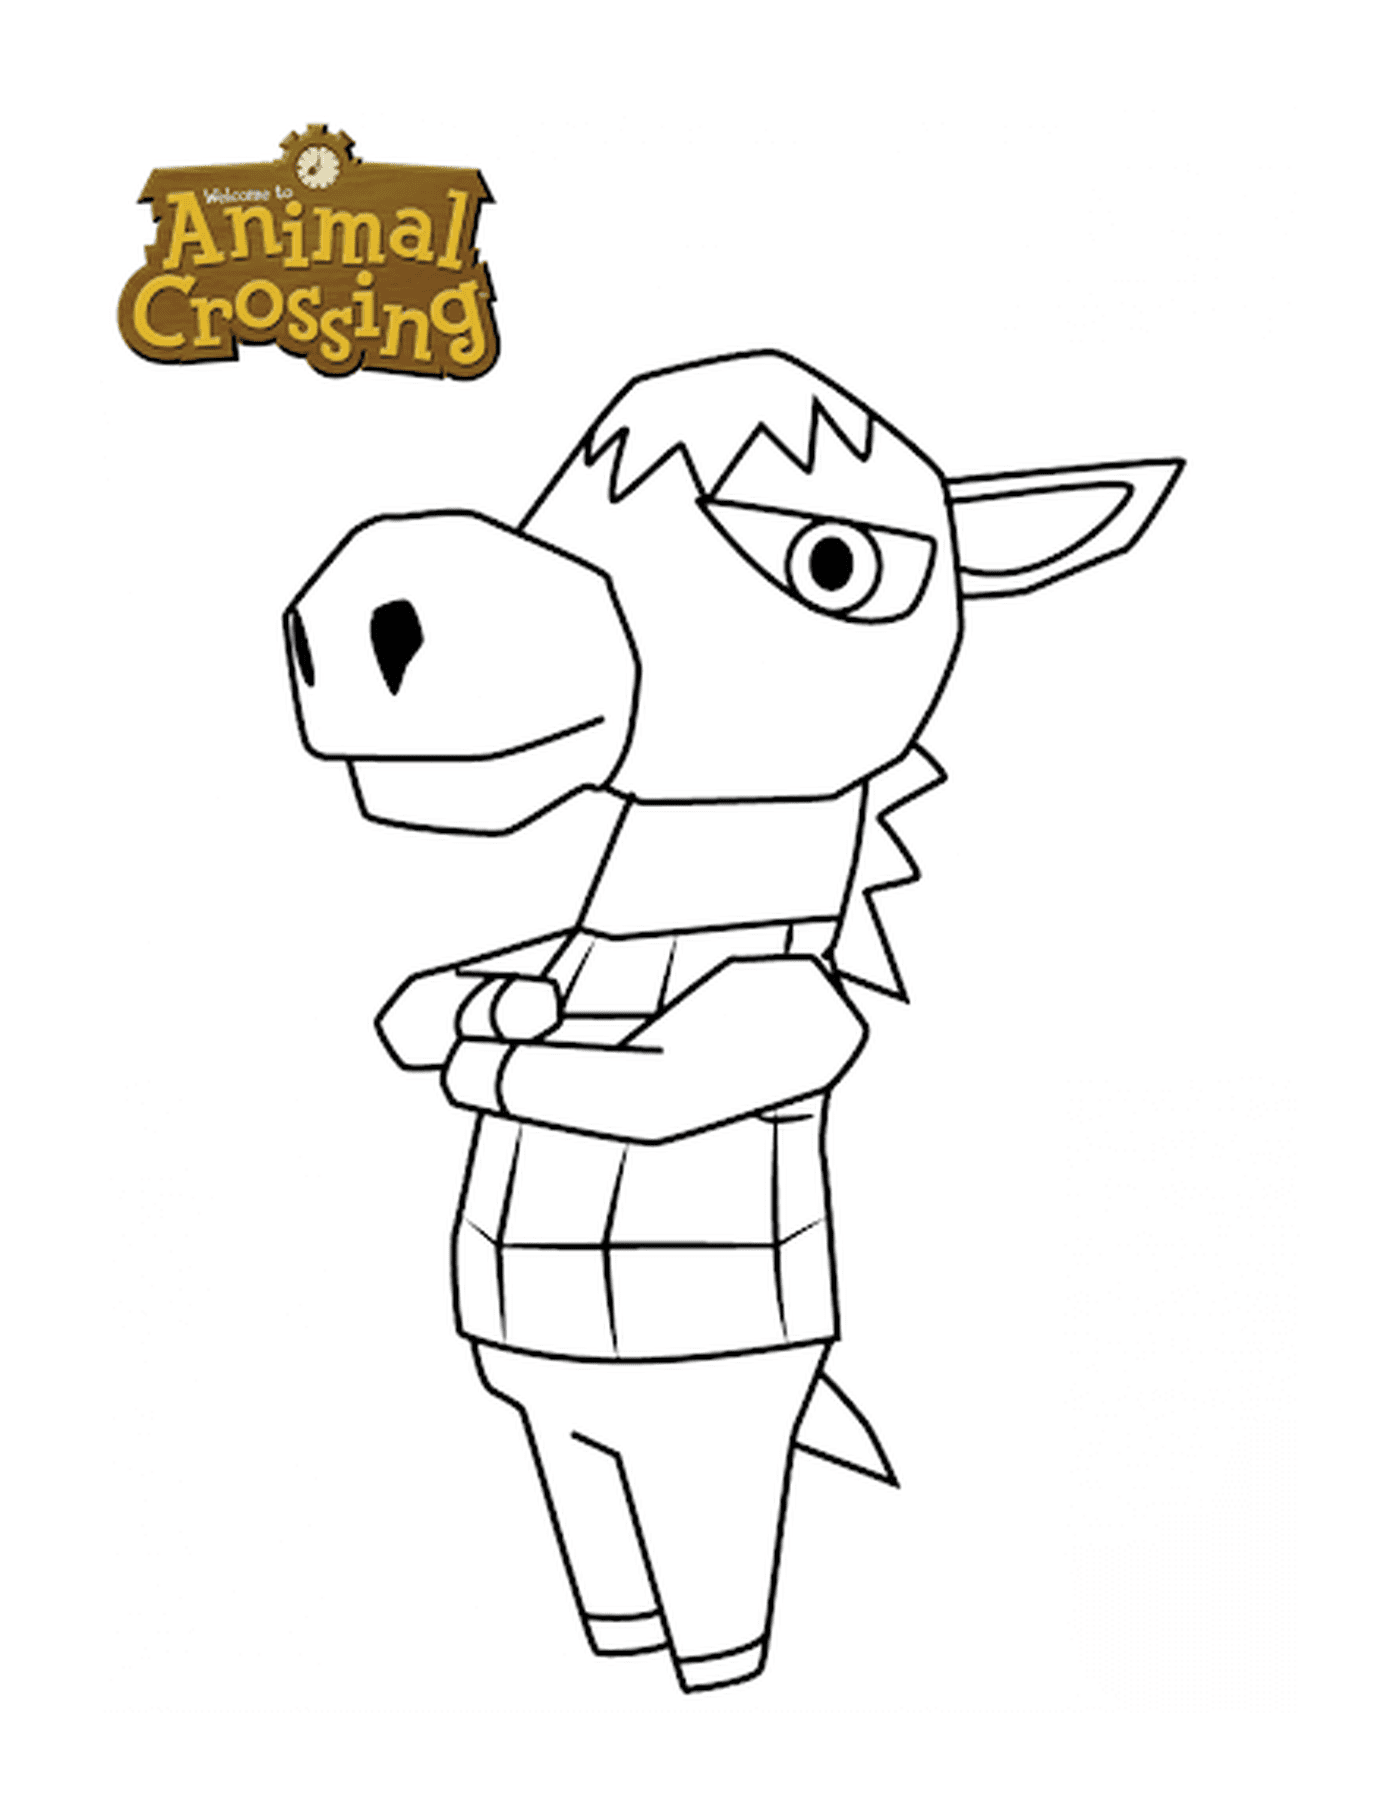  Animal Crossing, animal with a costume 